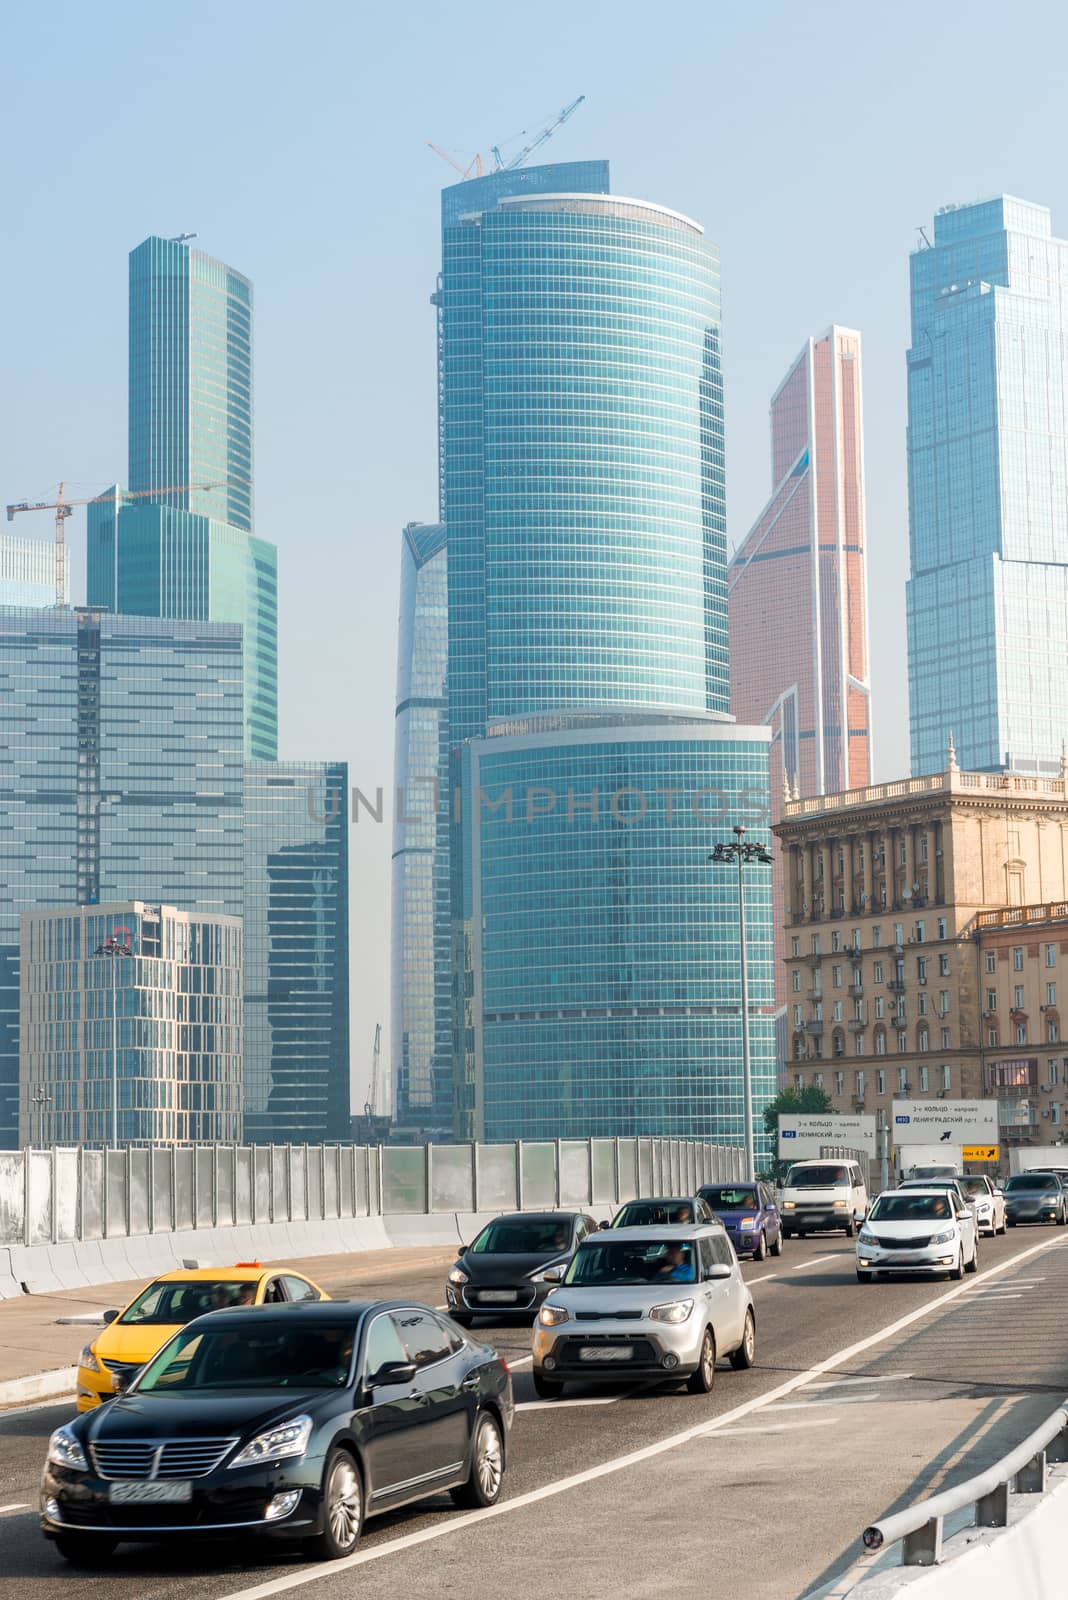 Skyscrapers and highways, Moscow City skyline, road traffic